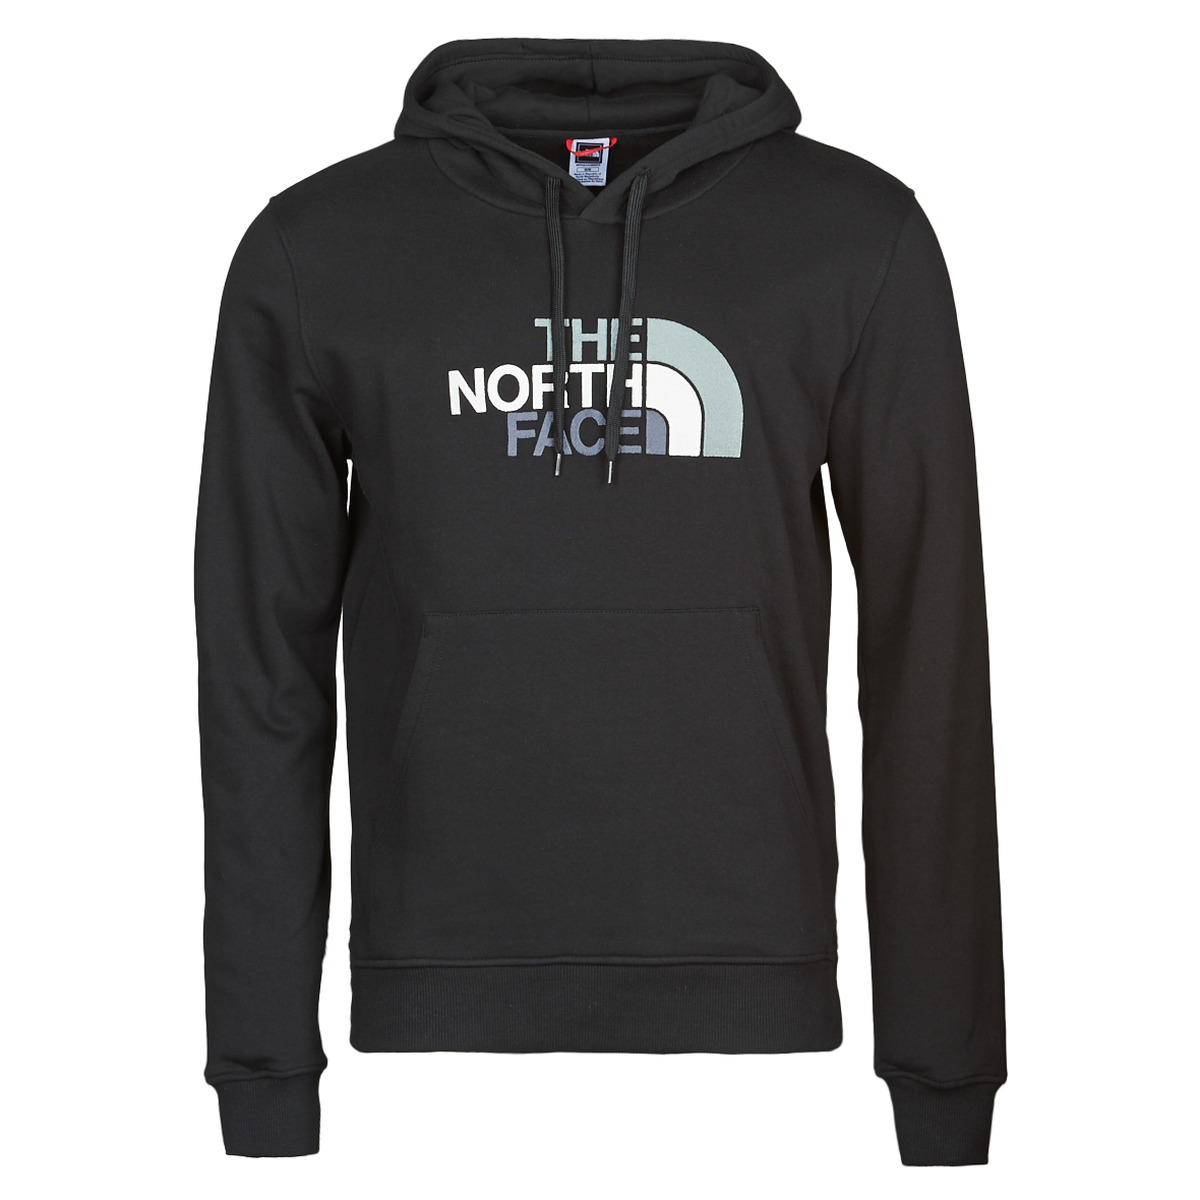 The North Face DREW PEAK PULLOVER HOODIE Black - Free delivery | Spartoo  NET ! - Clothing sweaters Men